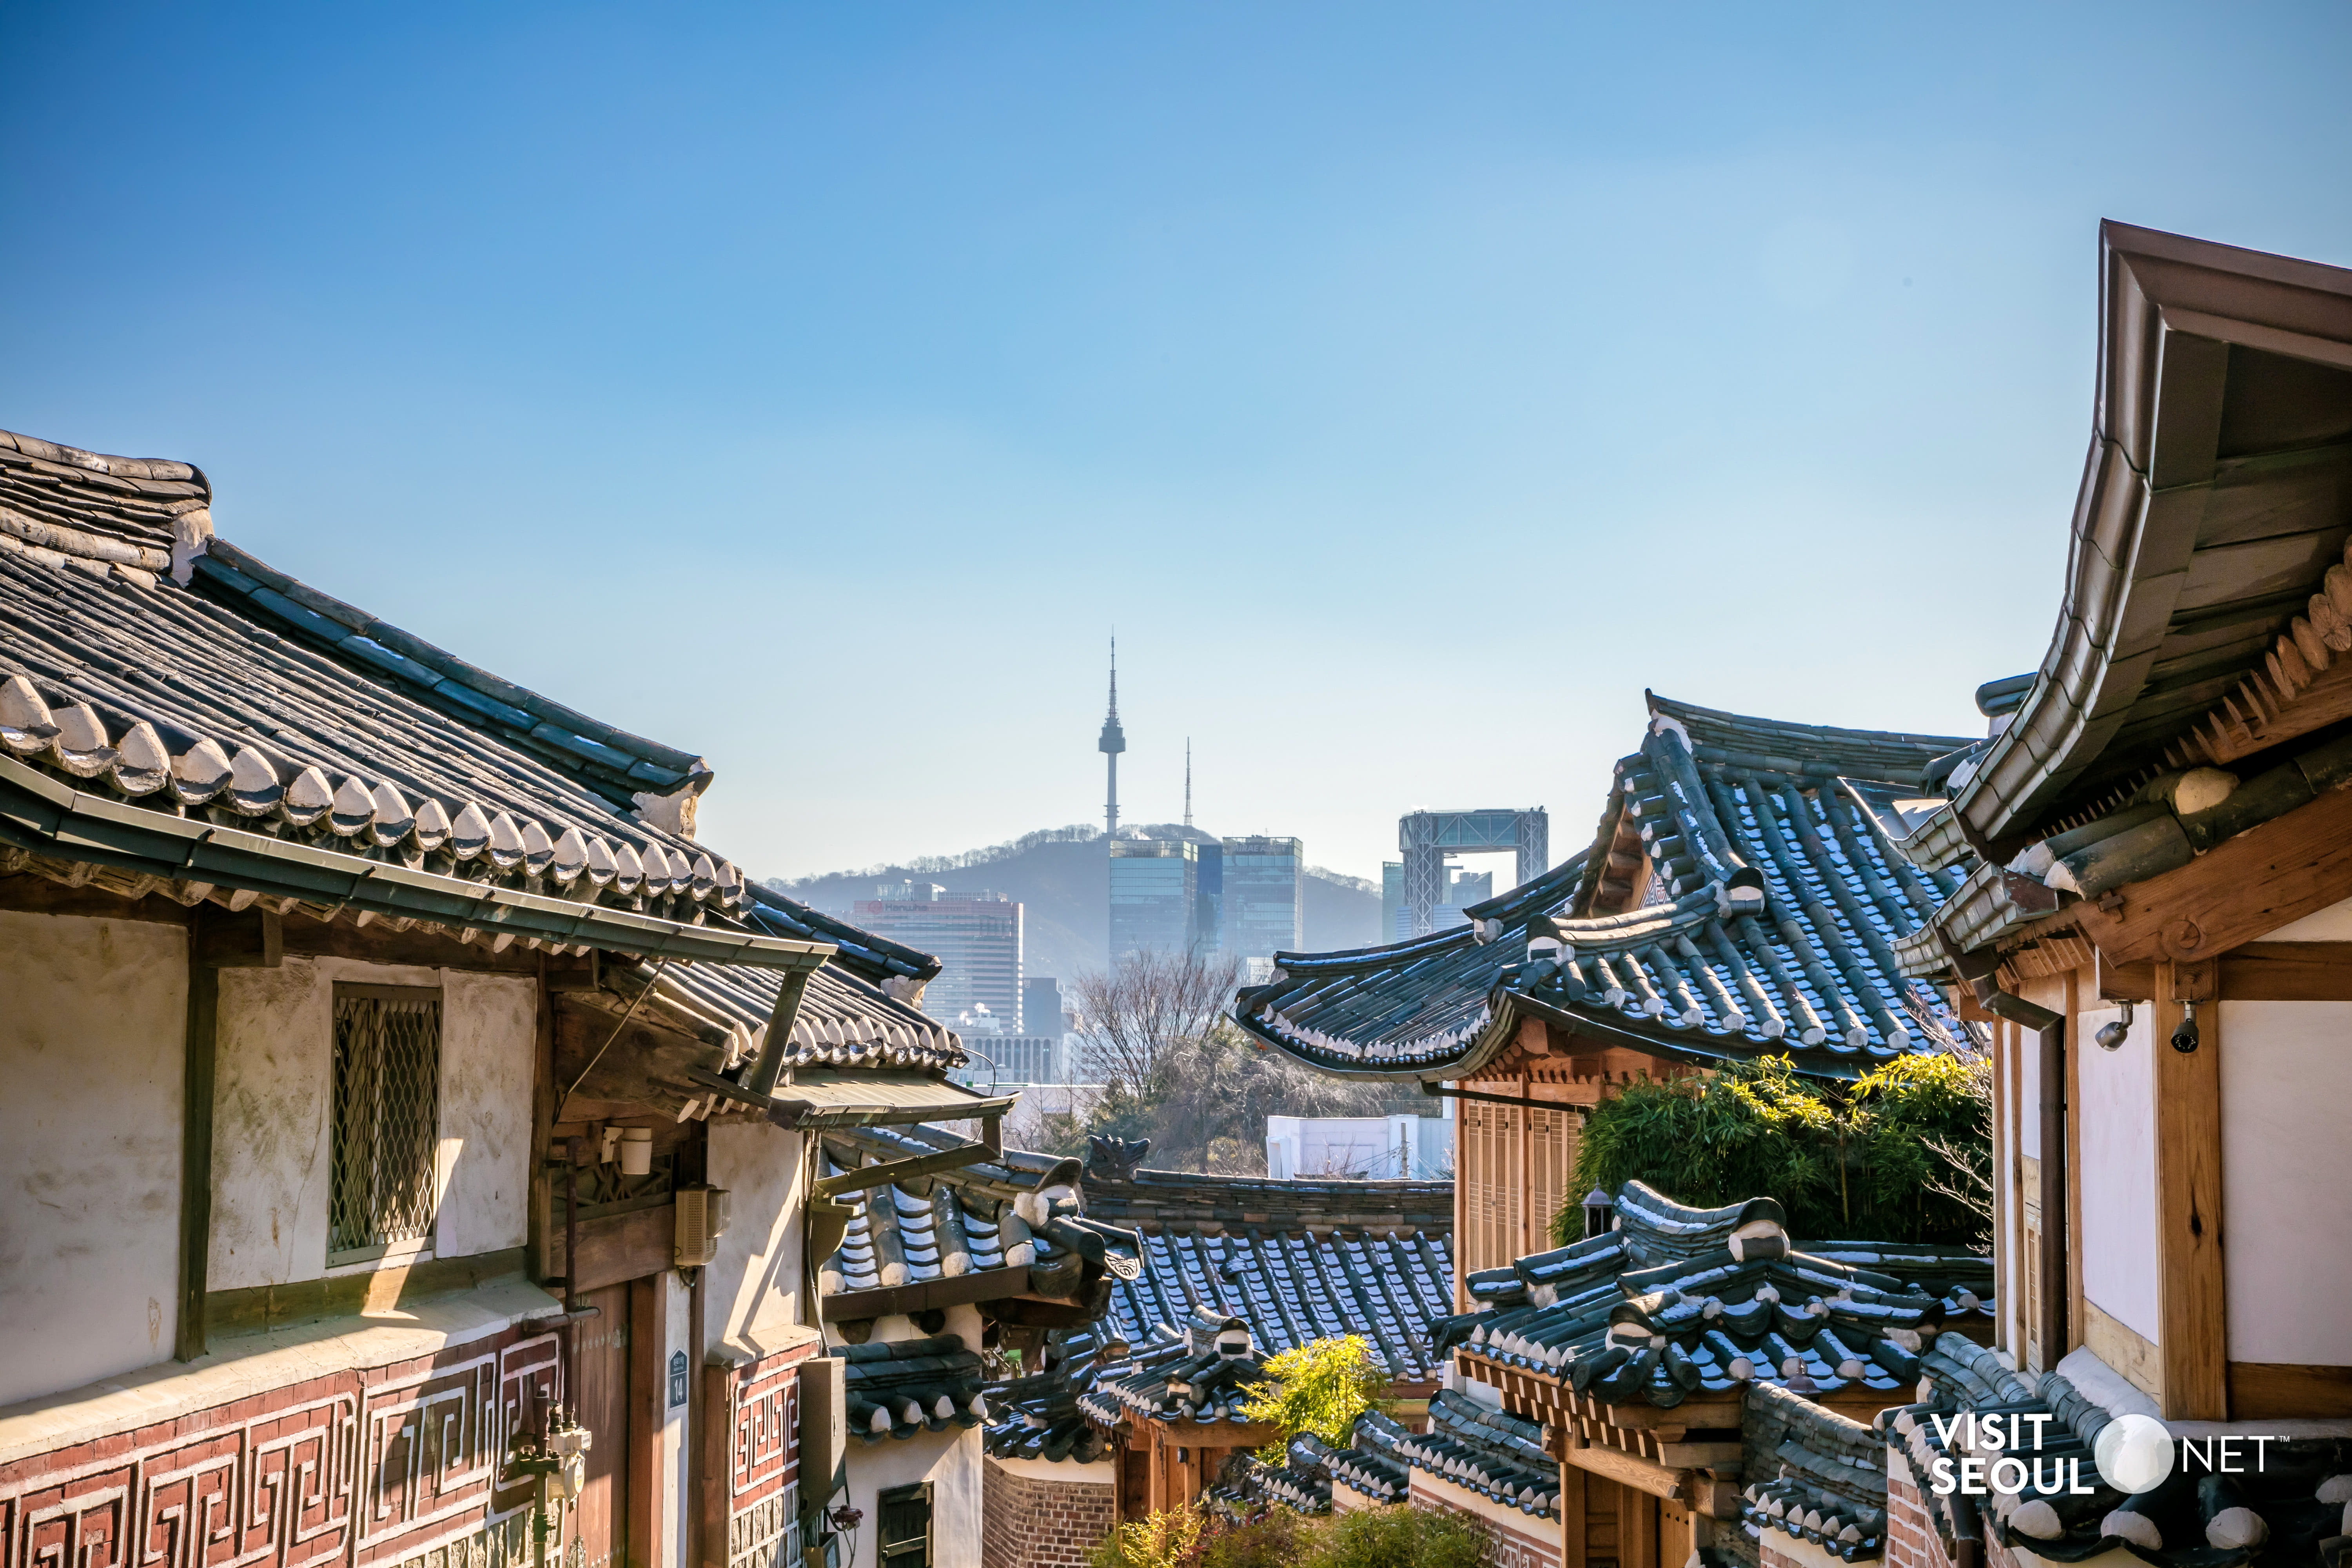 Bukchon Hanok Village3 : The view of the hanok village with N Seoul Tower in the background and the crowded hanok